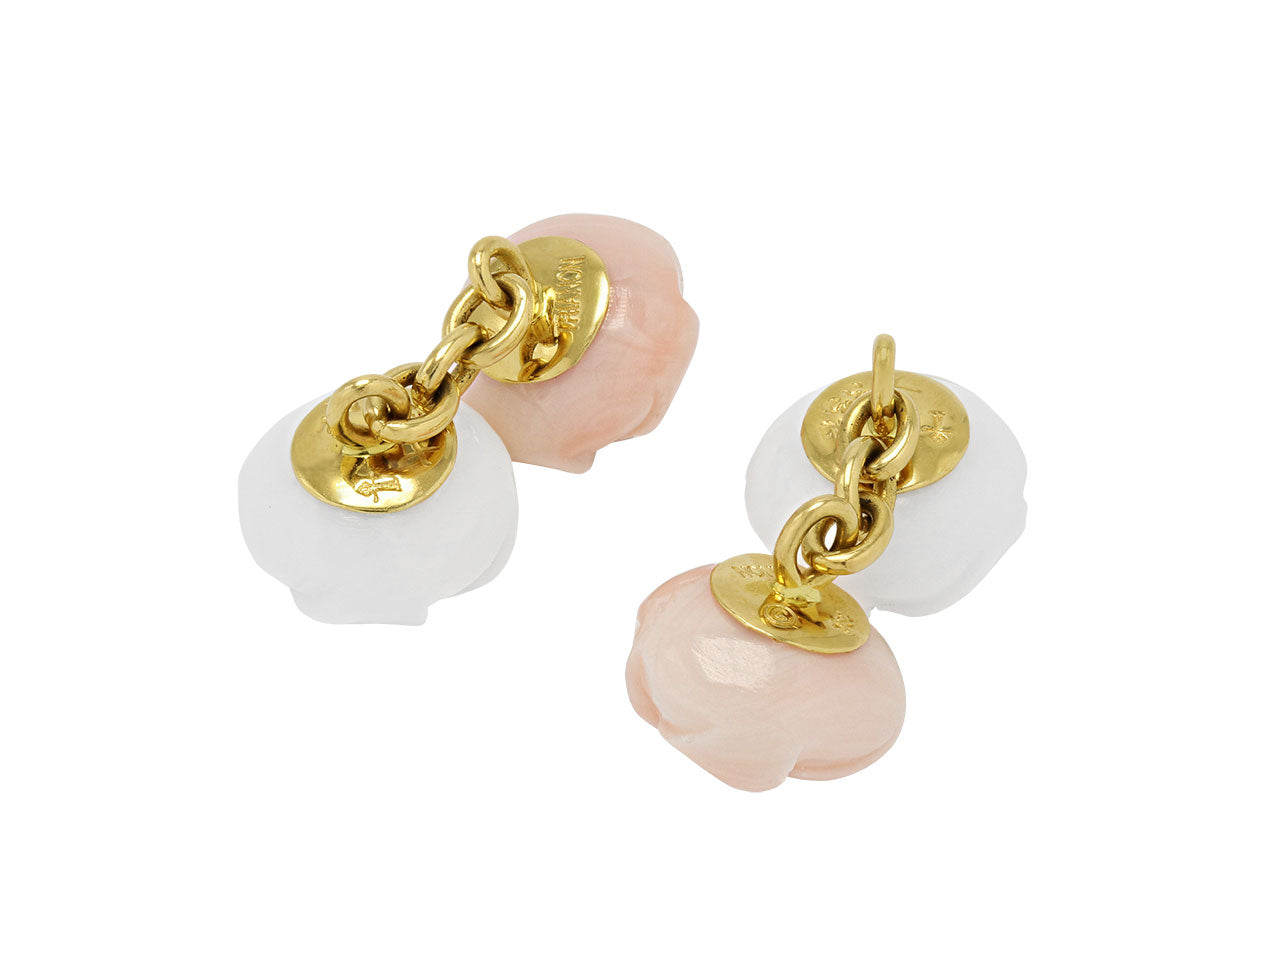 Trianon Carved White and Pink Onyx Cufflinks in 18K Gold